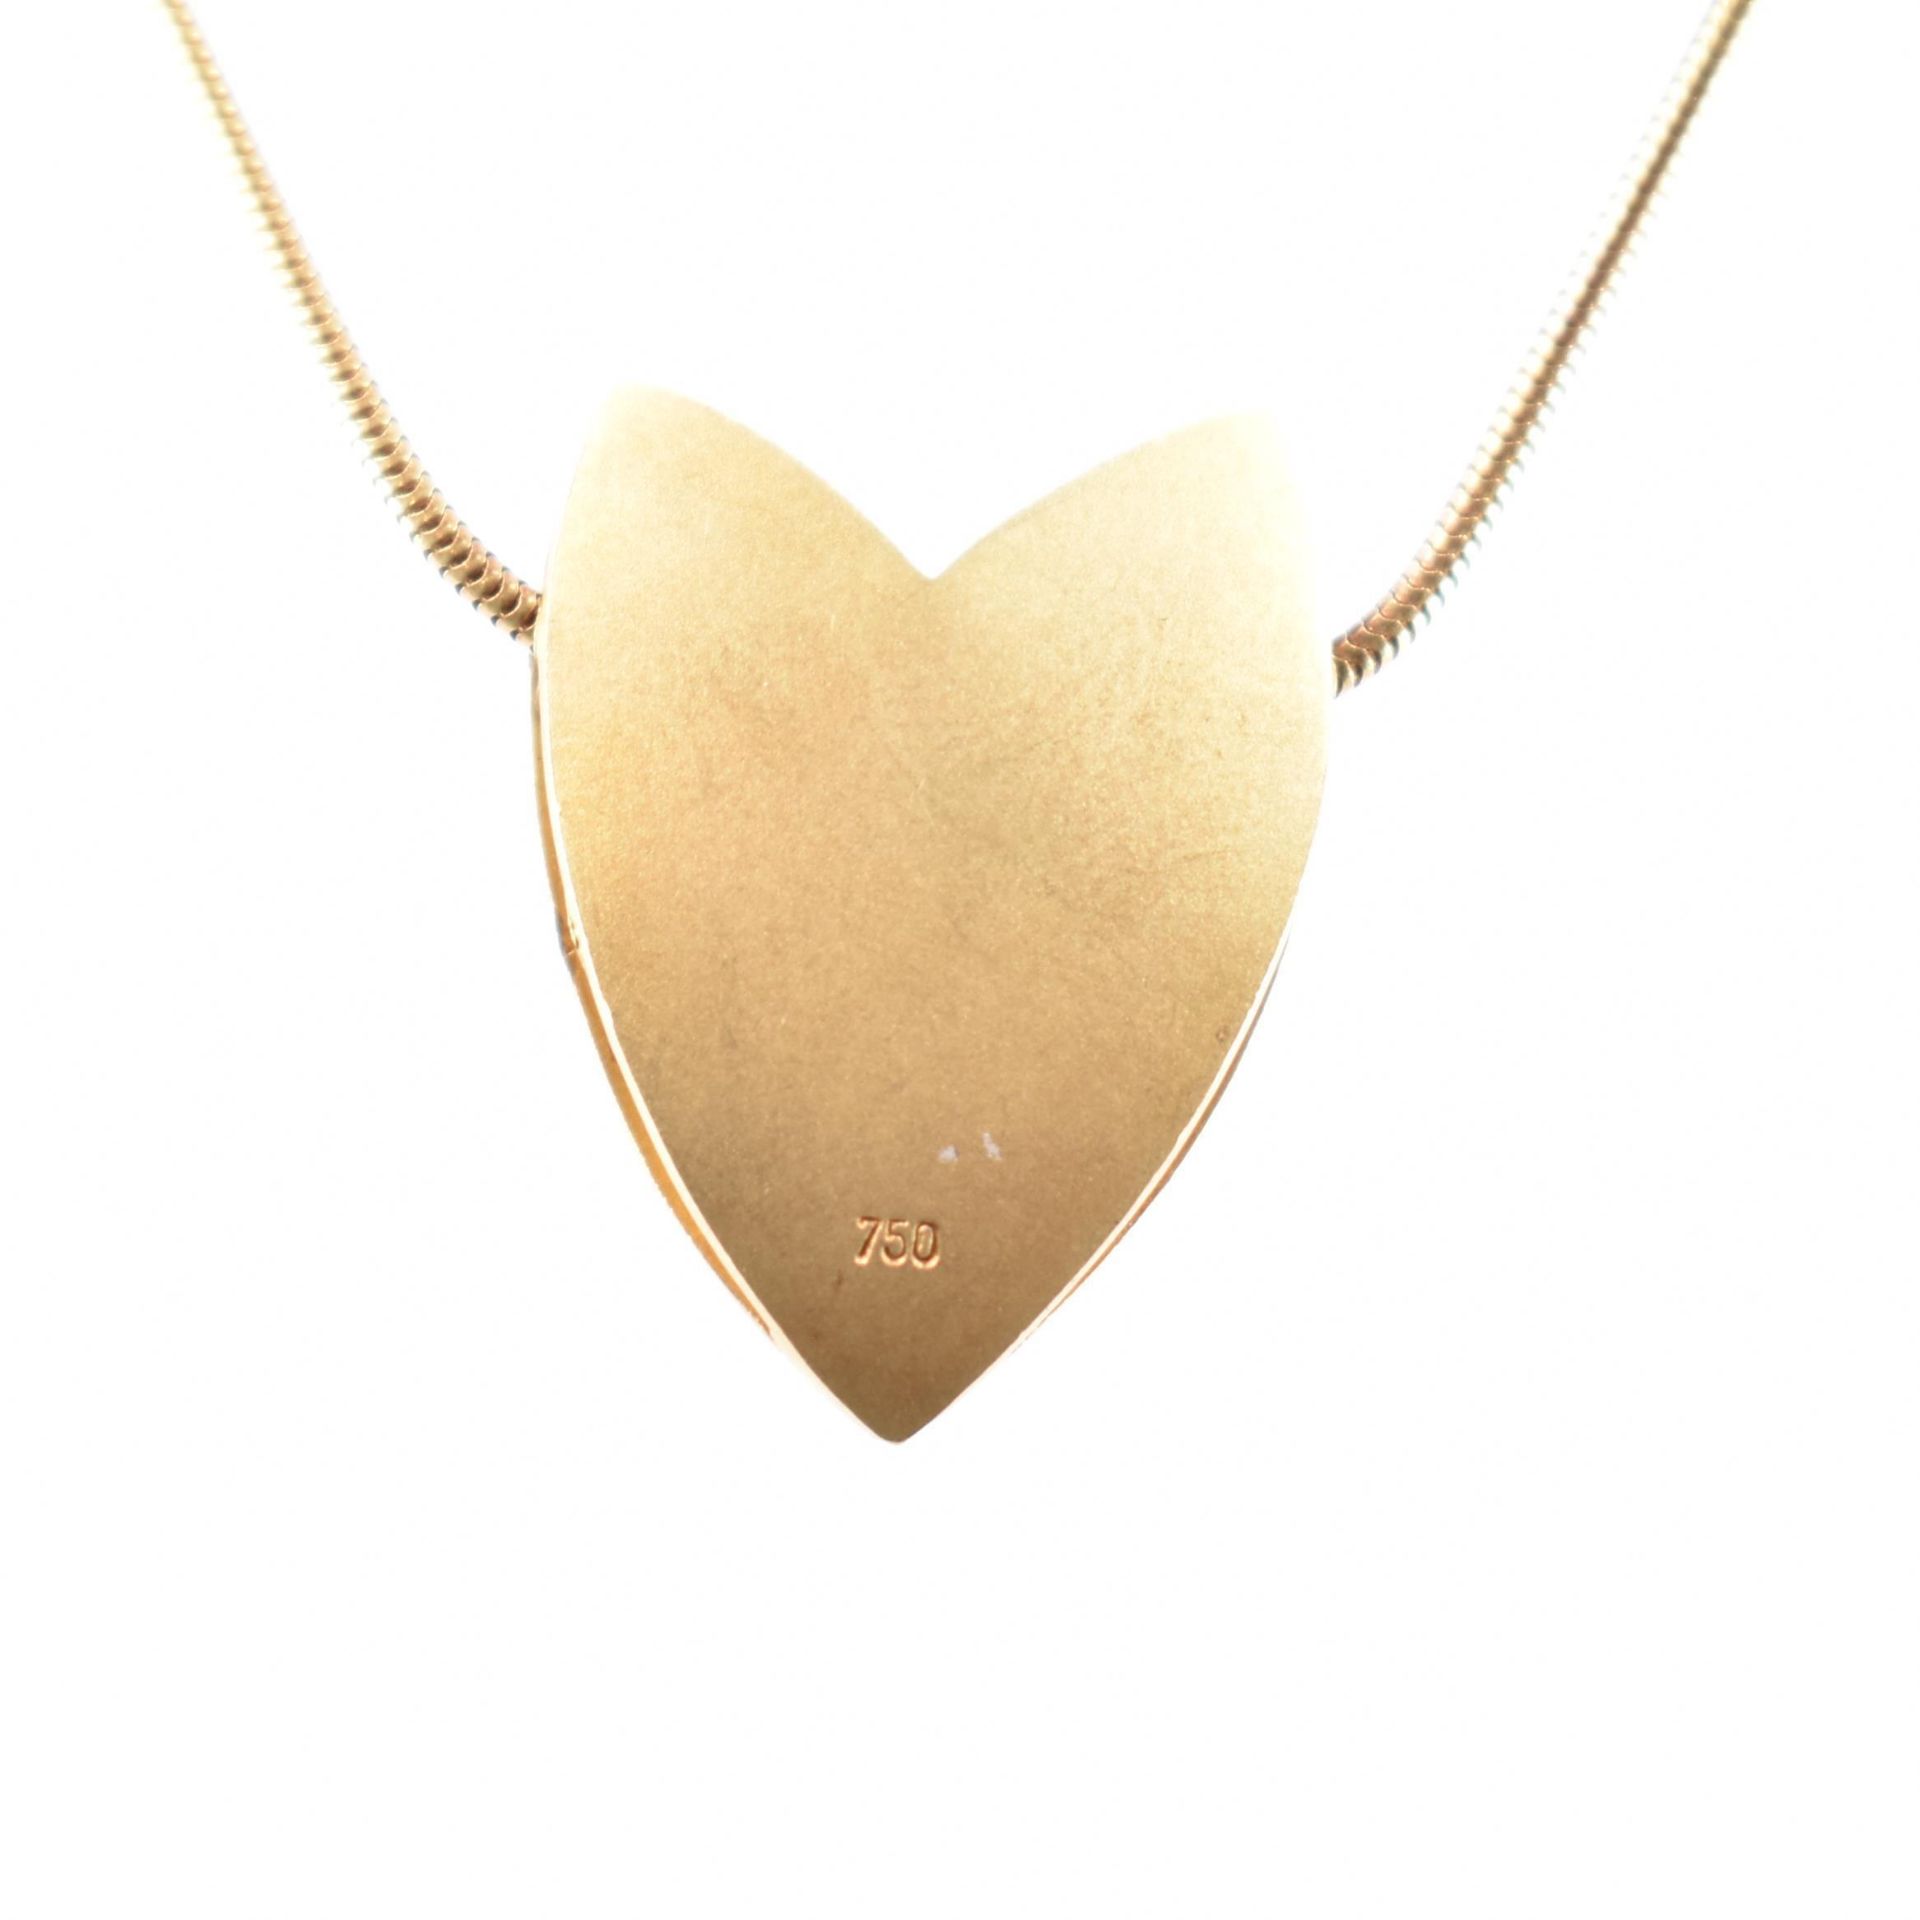 18CT GOLD & DIAMOND PENDANT & CHAIN NECKLACE - Image 2 of 3